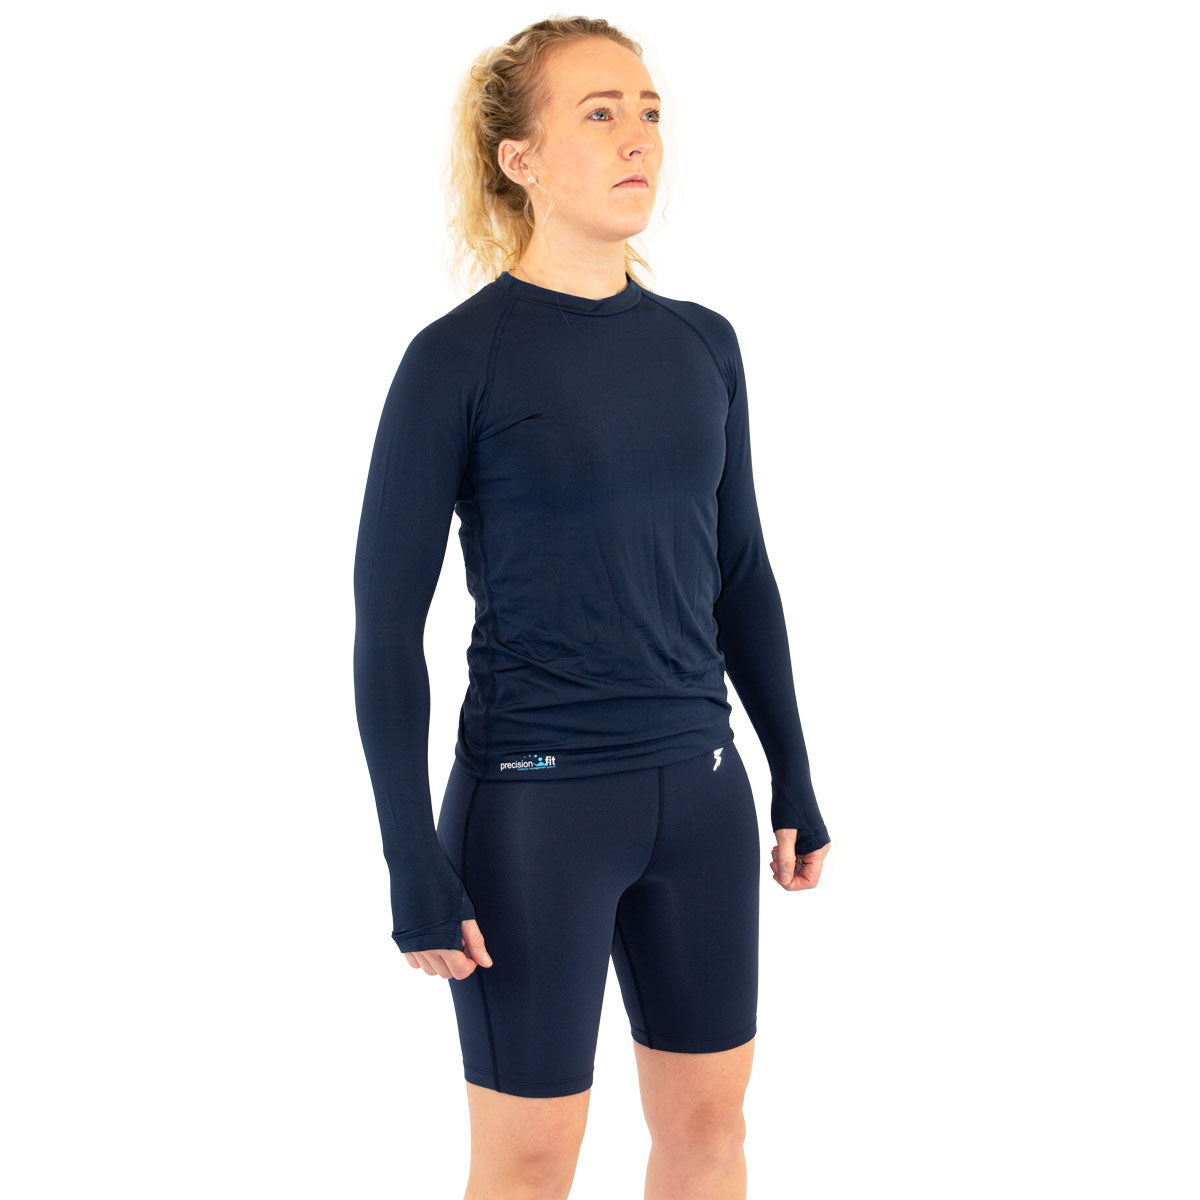 Precision Training Essential Baselayer Long Sleeve Shirt - Youth - Navy